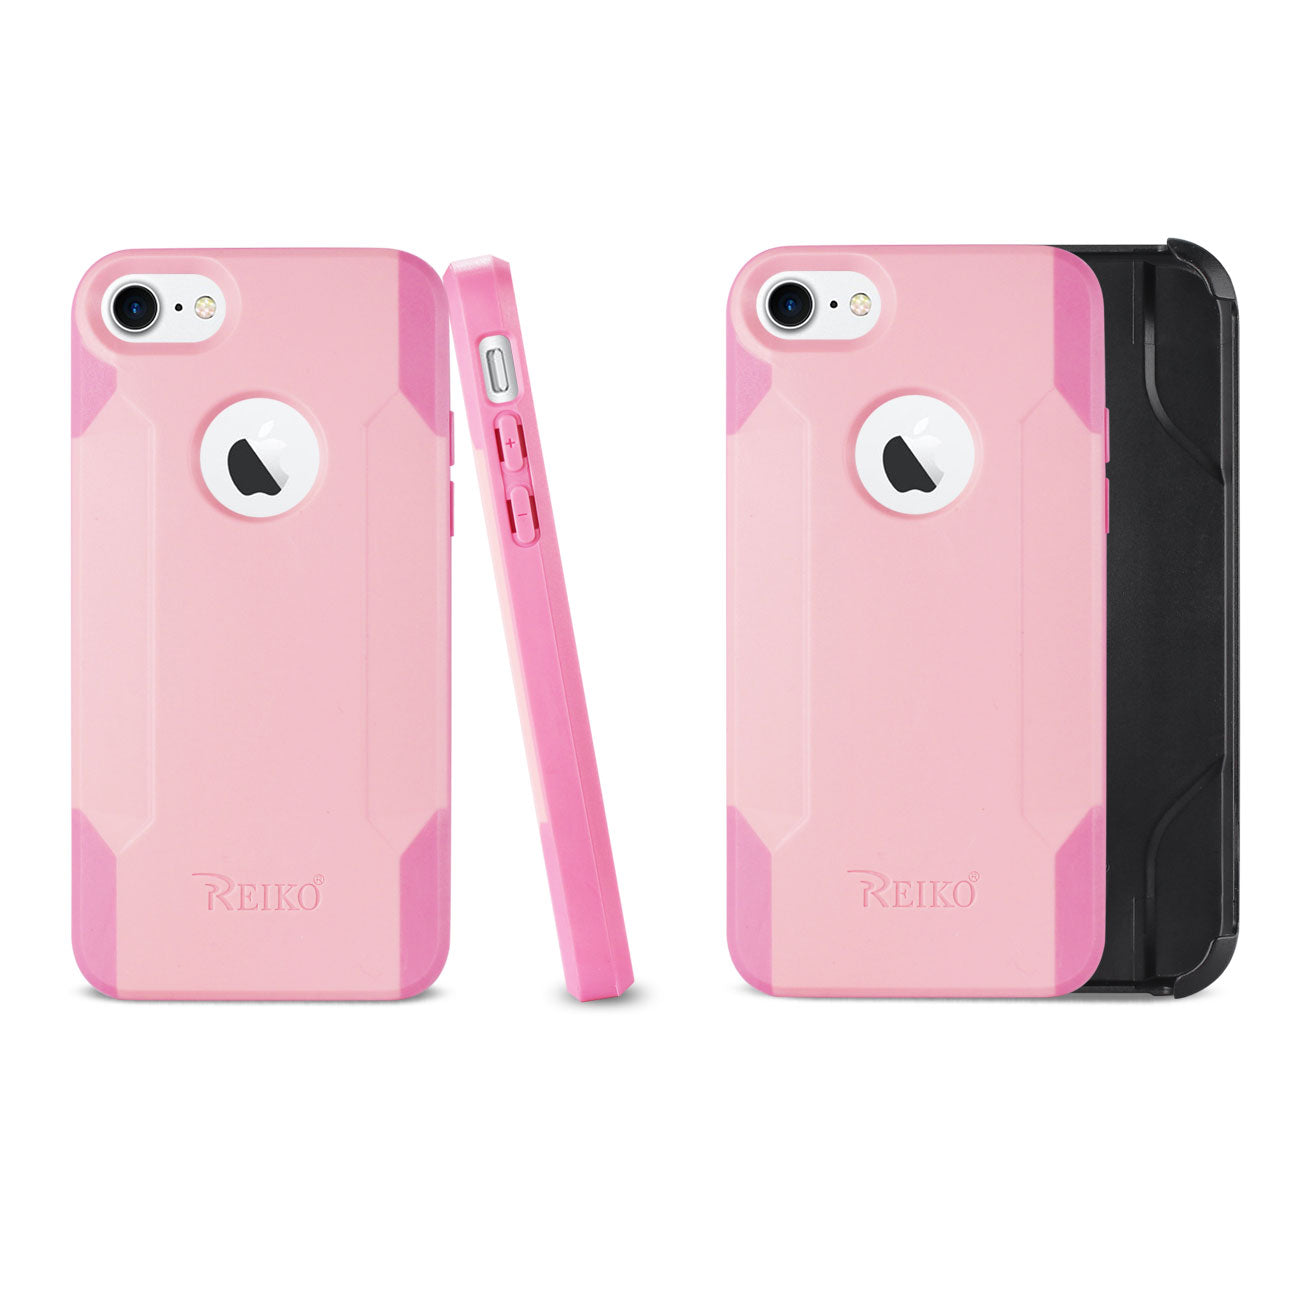 Case Holster Combo Hybrid Heavy Duty 3-In-1 iPhone 7/ 8/ SE2 Light Pink Color